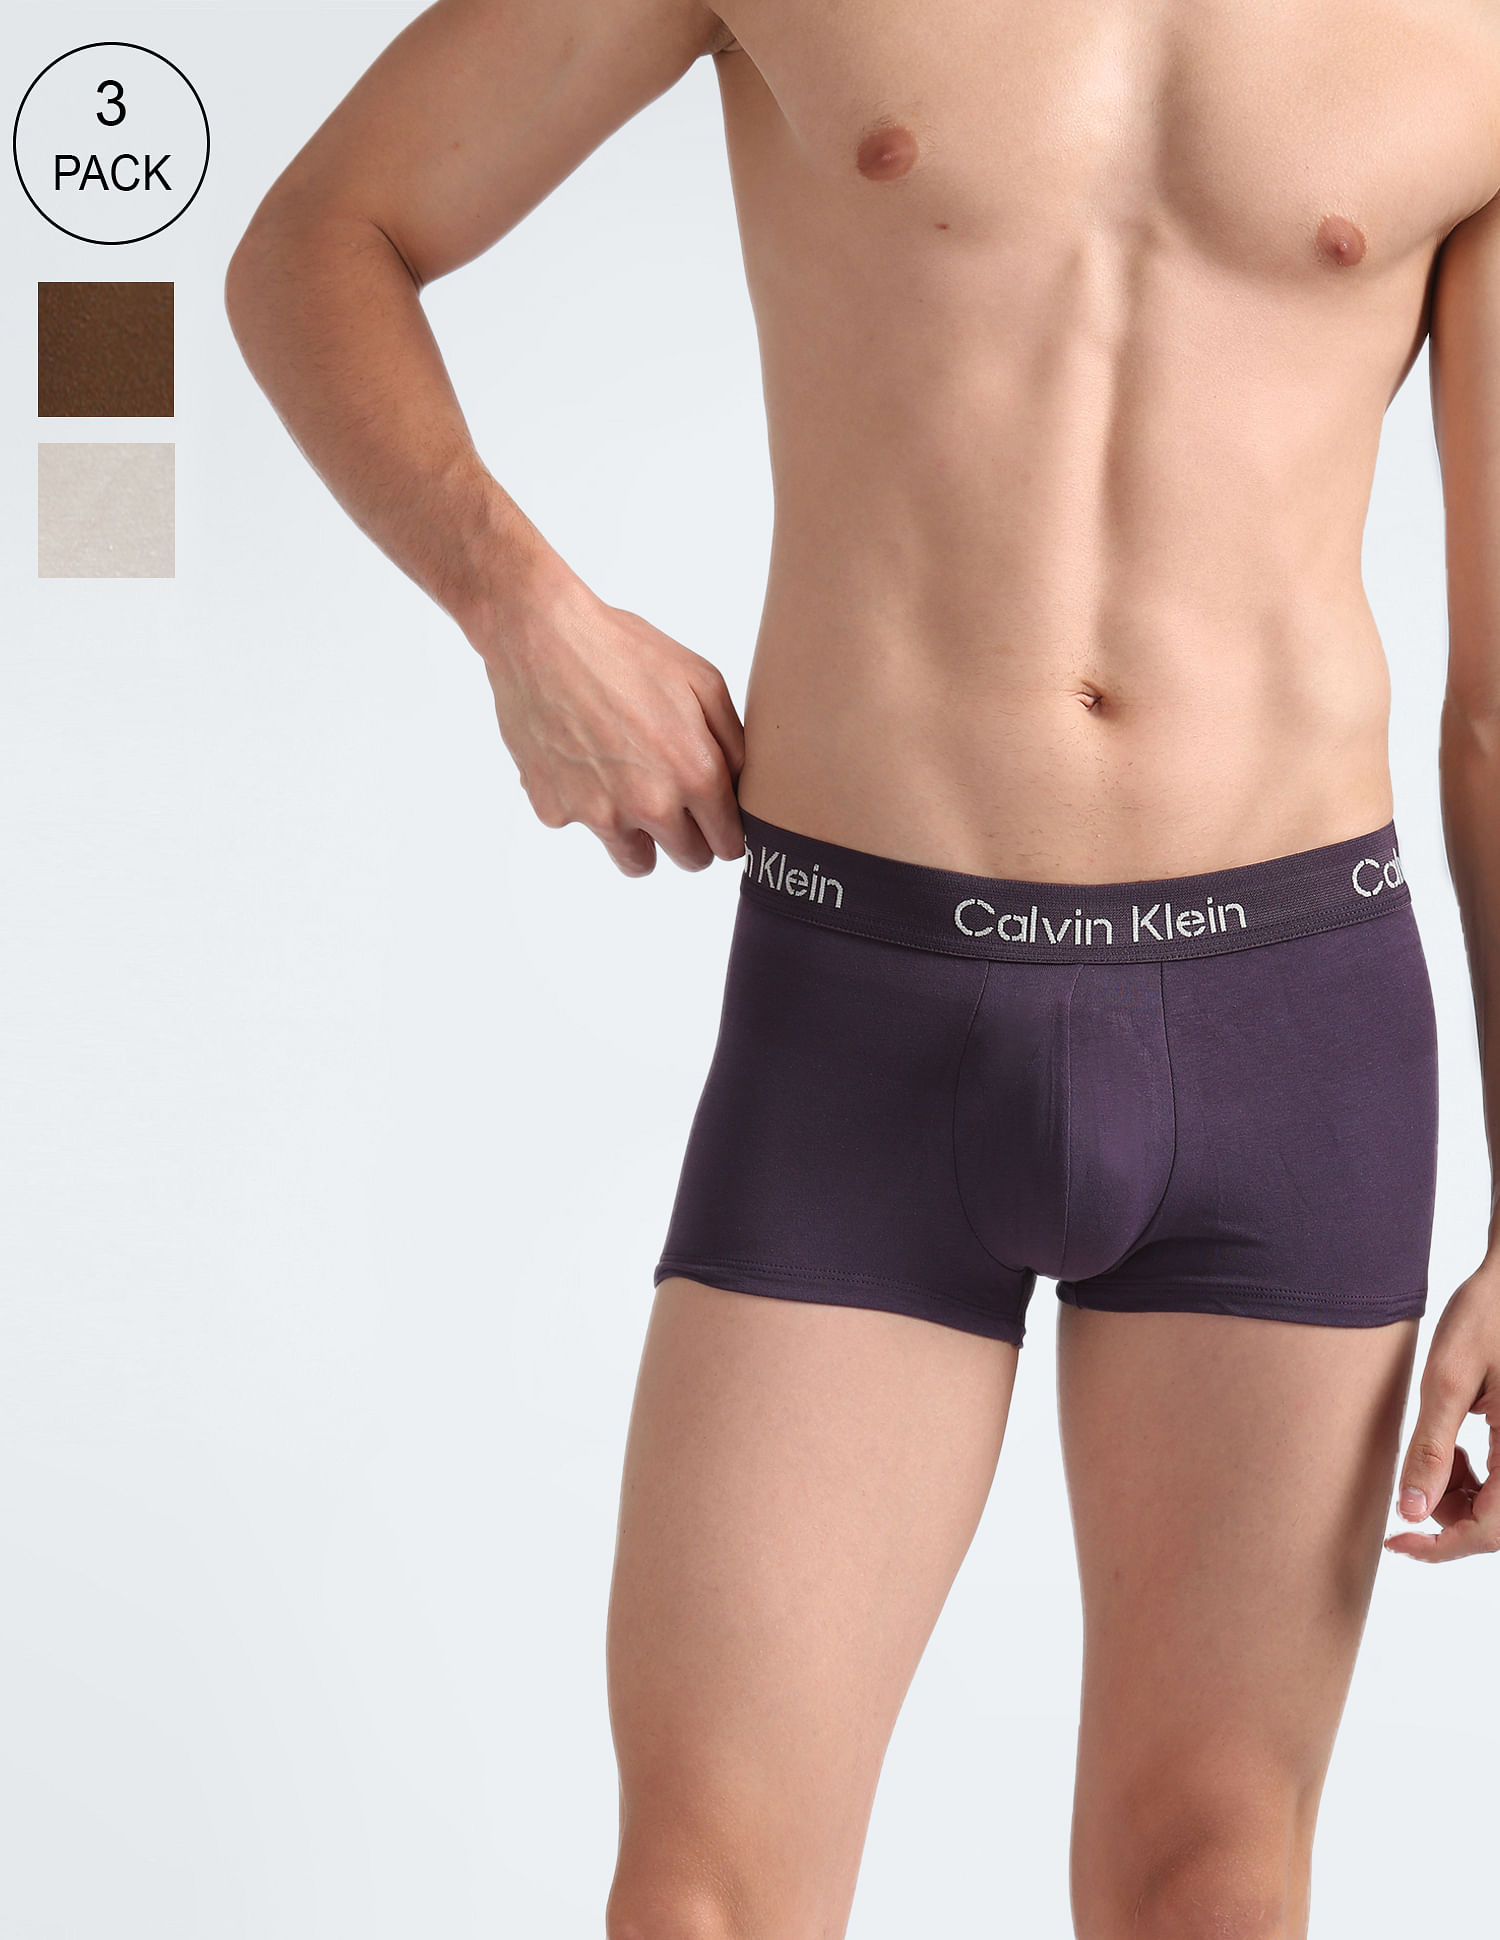 Calvin Klein Low-Rise Cotton Stretch Solid Trunks 3-Pack